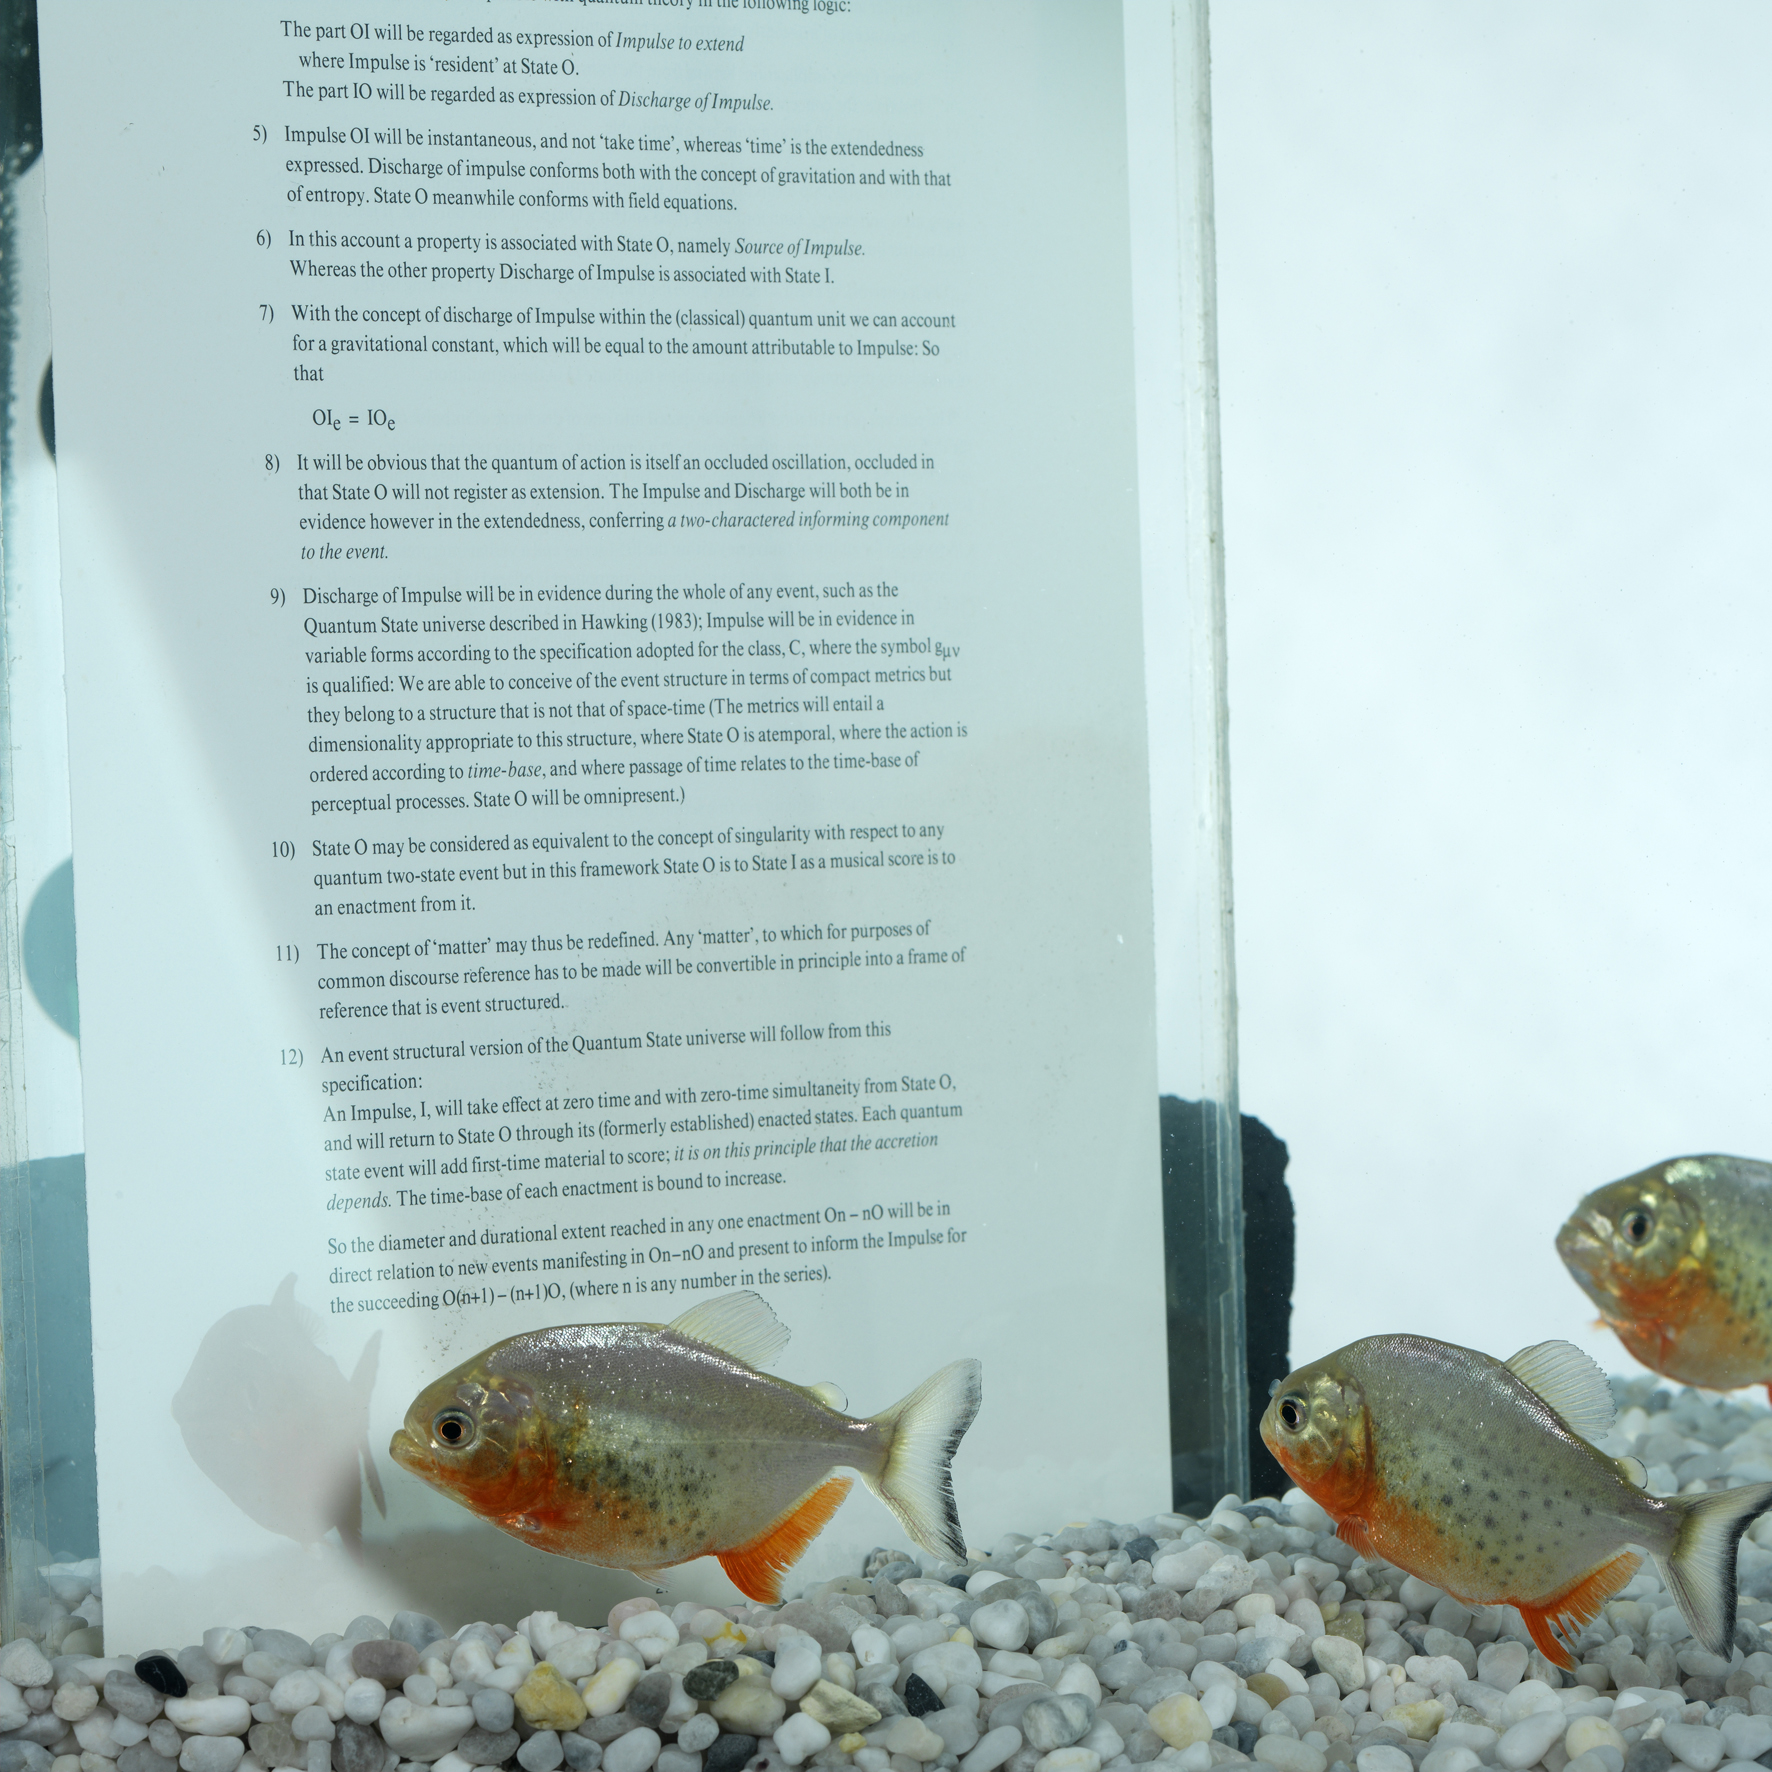 They're learning fast (1988) Fish-tank, pages from 'Report of a Surveyor', piranhas. Photo: Ken Adlard (Distress of a Dictionary 3)